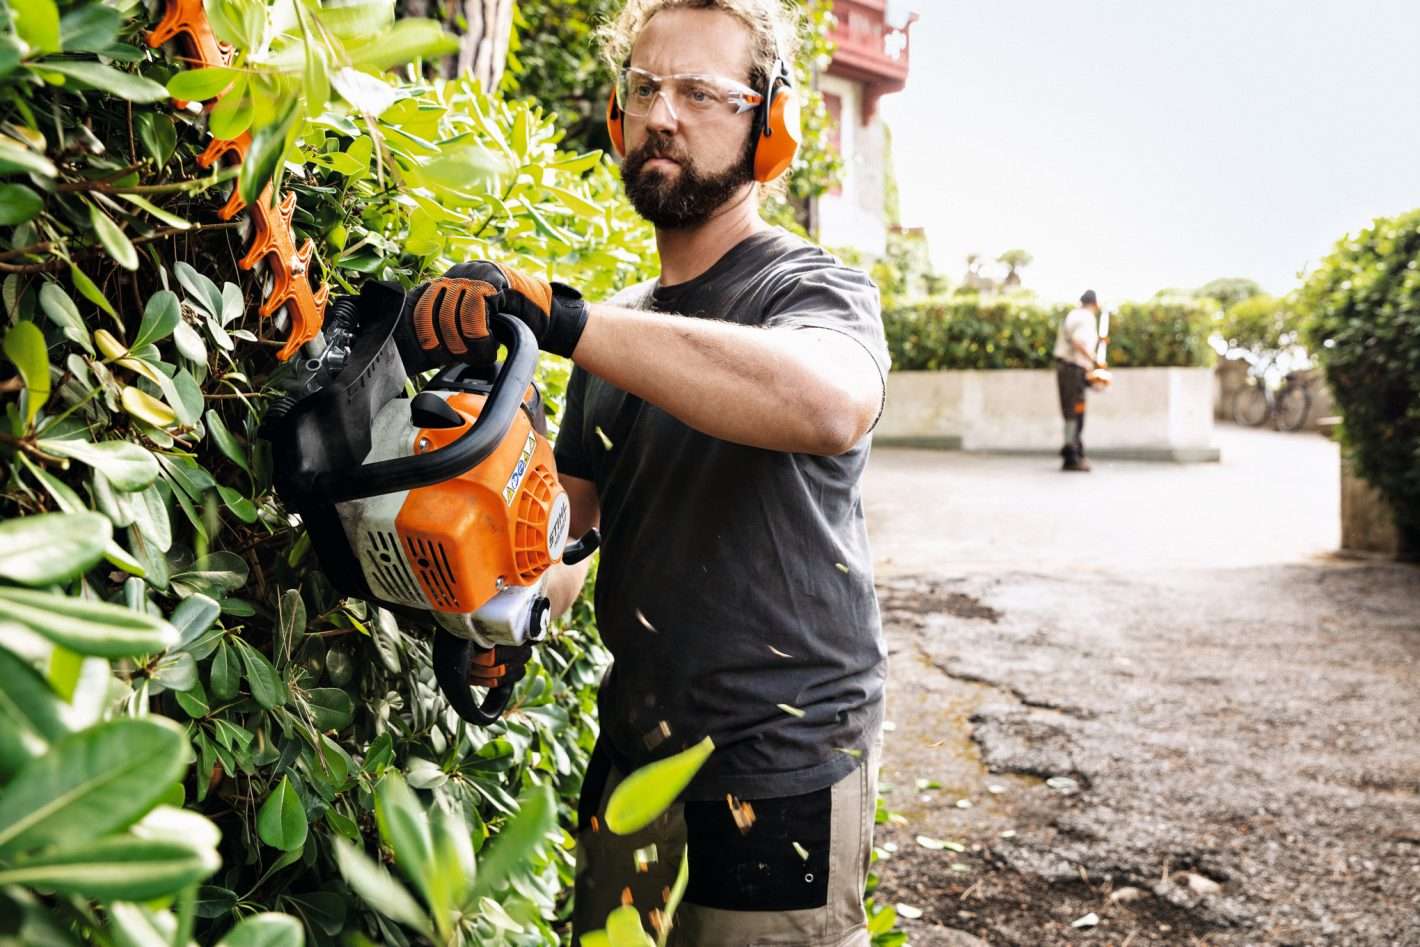 Taille-haie thermique Stihl HS 82 R